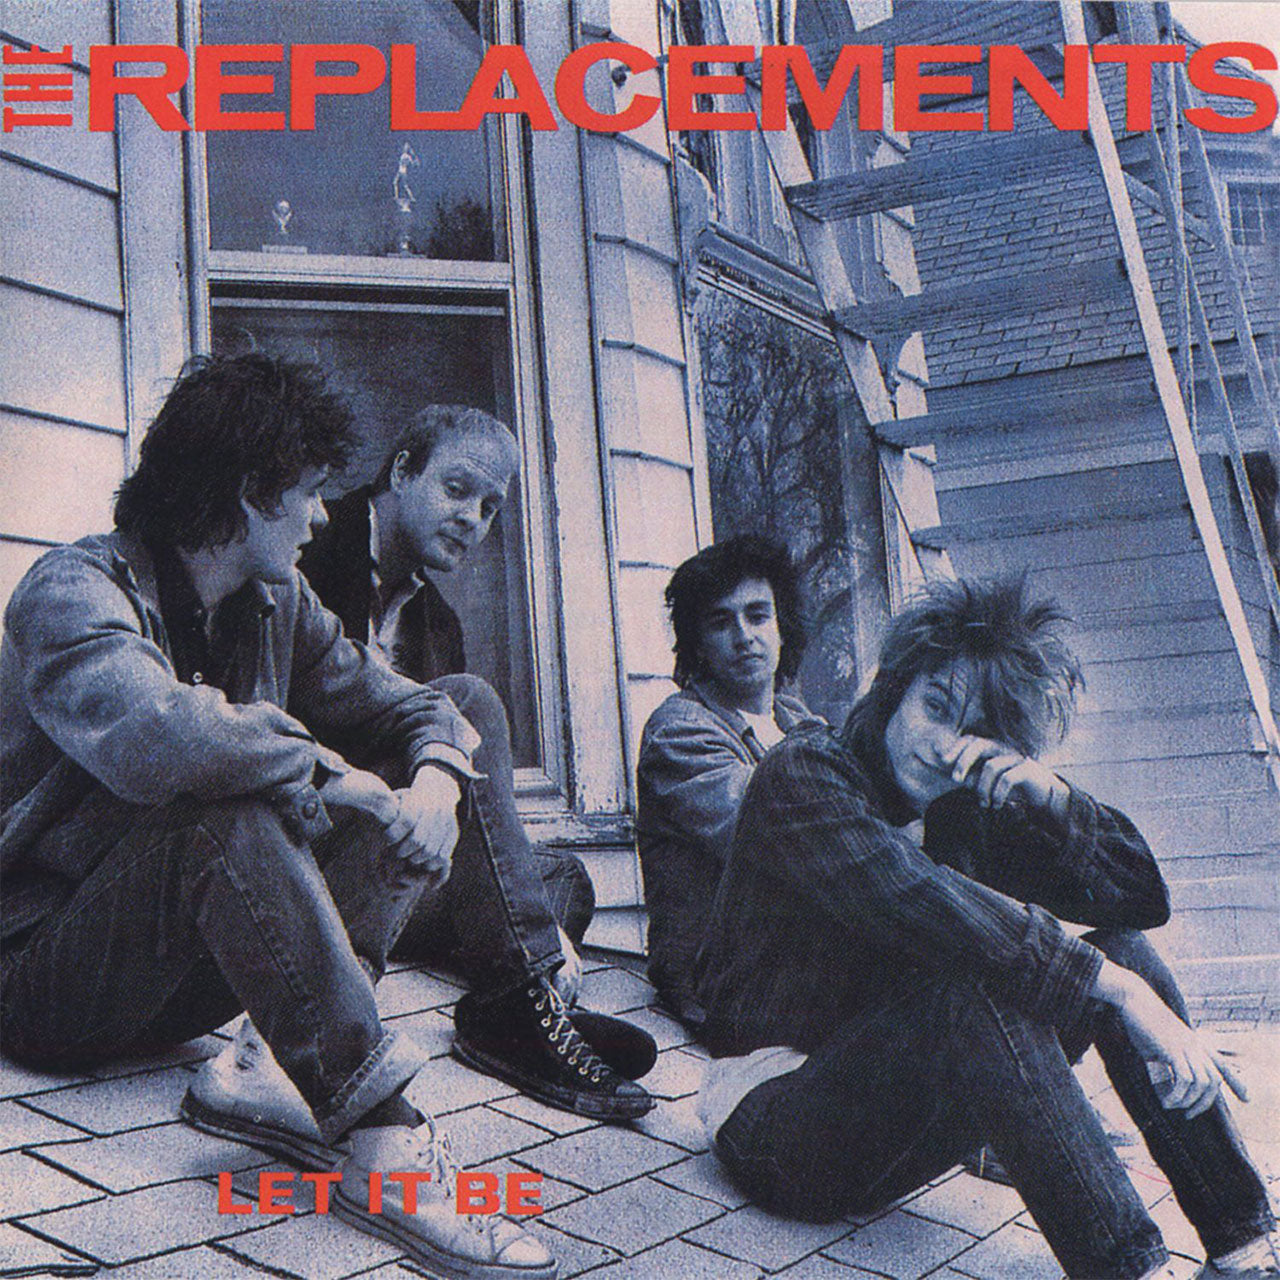 The Replacements - Let it Be (Deluxe Edition) (2008 Reissue) (CD)